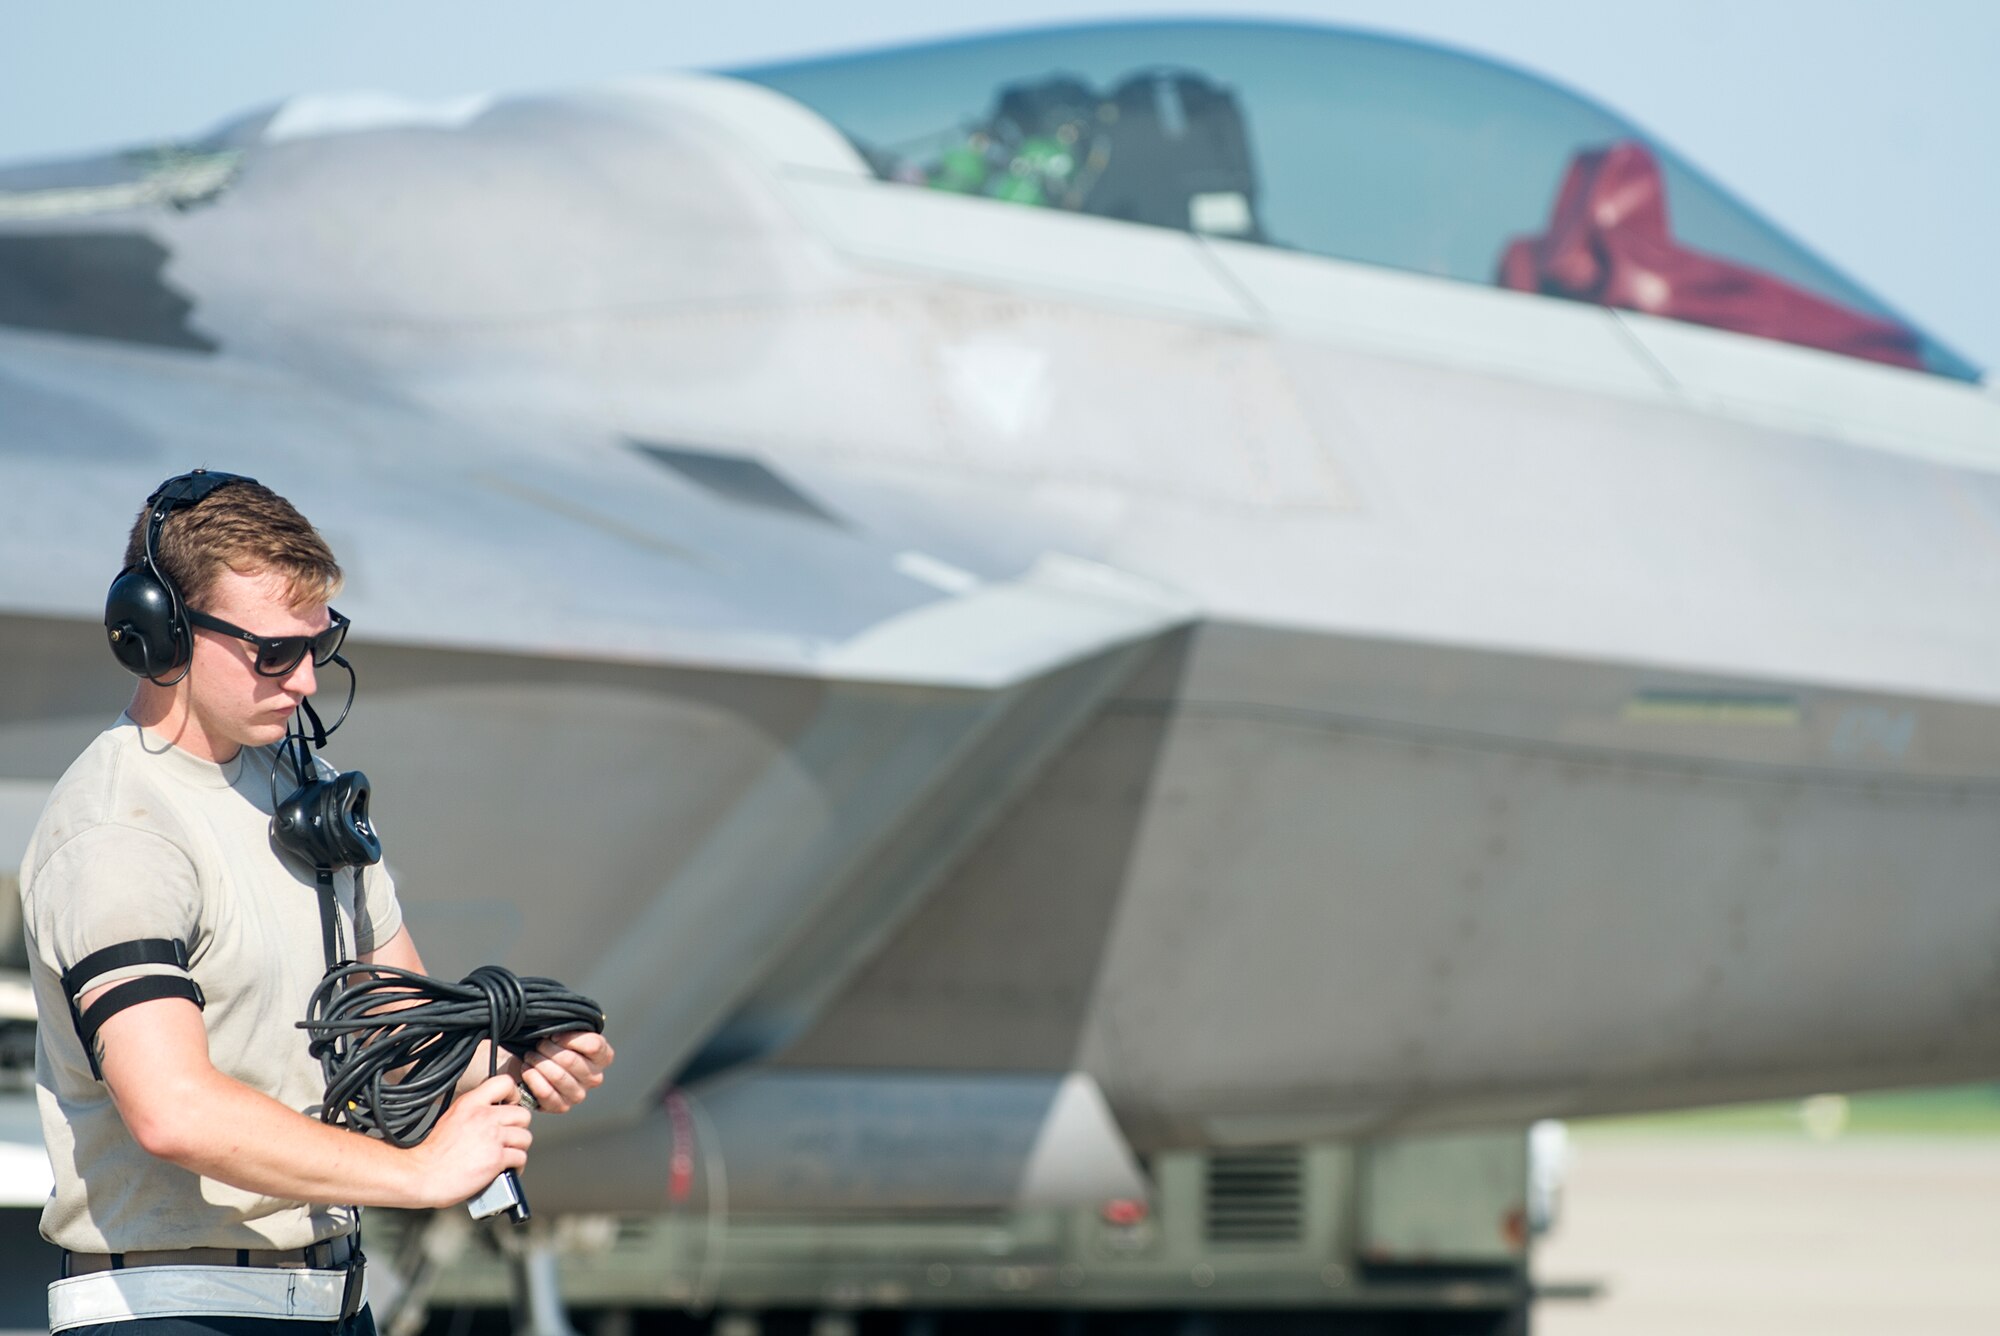 U.S. Air Force Airman 1st Class Steven Prater, 1st Maintenance Squadron weapons load crew member, prepares to launch a F-22 Raptor for Red Flag 16-3 at Langley Air Force Base, Va., July 7, 2016. AF Airmen and service members from allied countries come together during Red Flag at Nellis Air Force Base, Nev., to experience realistic combat scenarios and to train in the event of future conflicts of war. (U.S. Air Force photo by Airman 1st Class Kaylee Dubois)